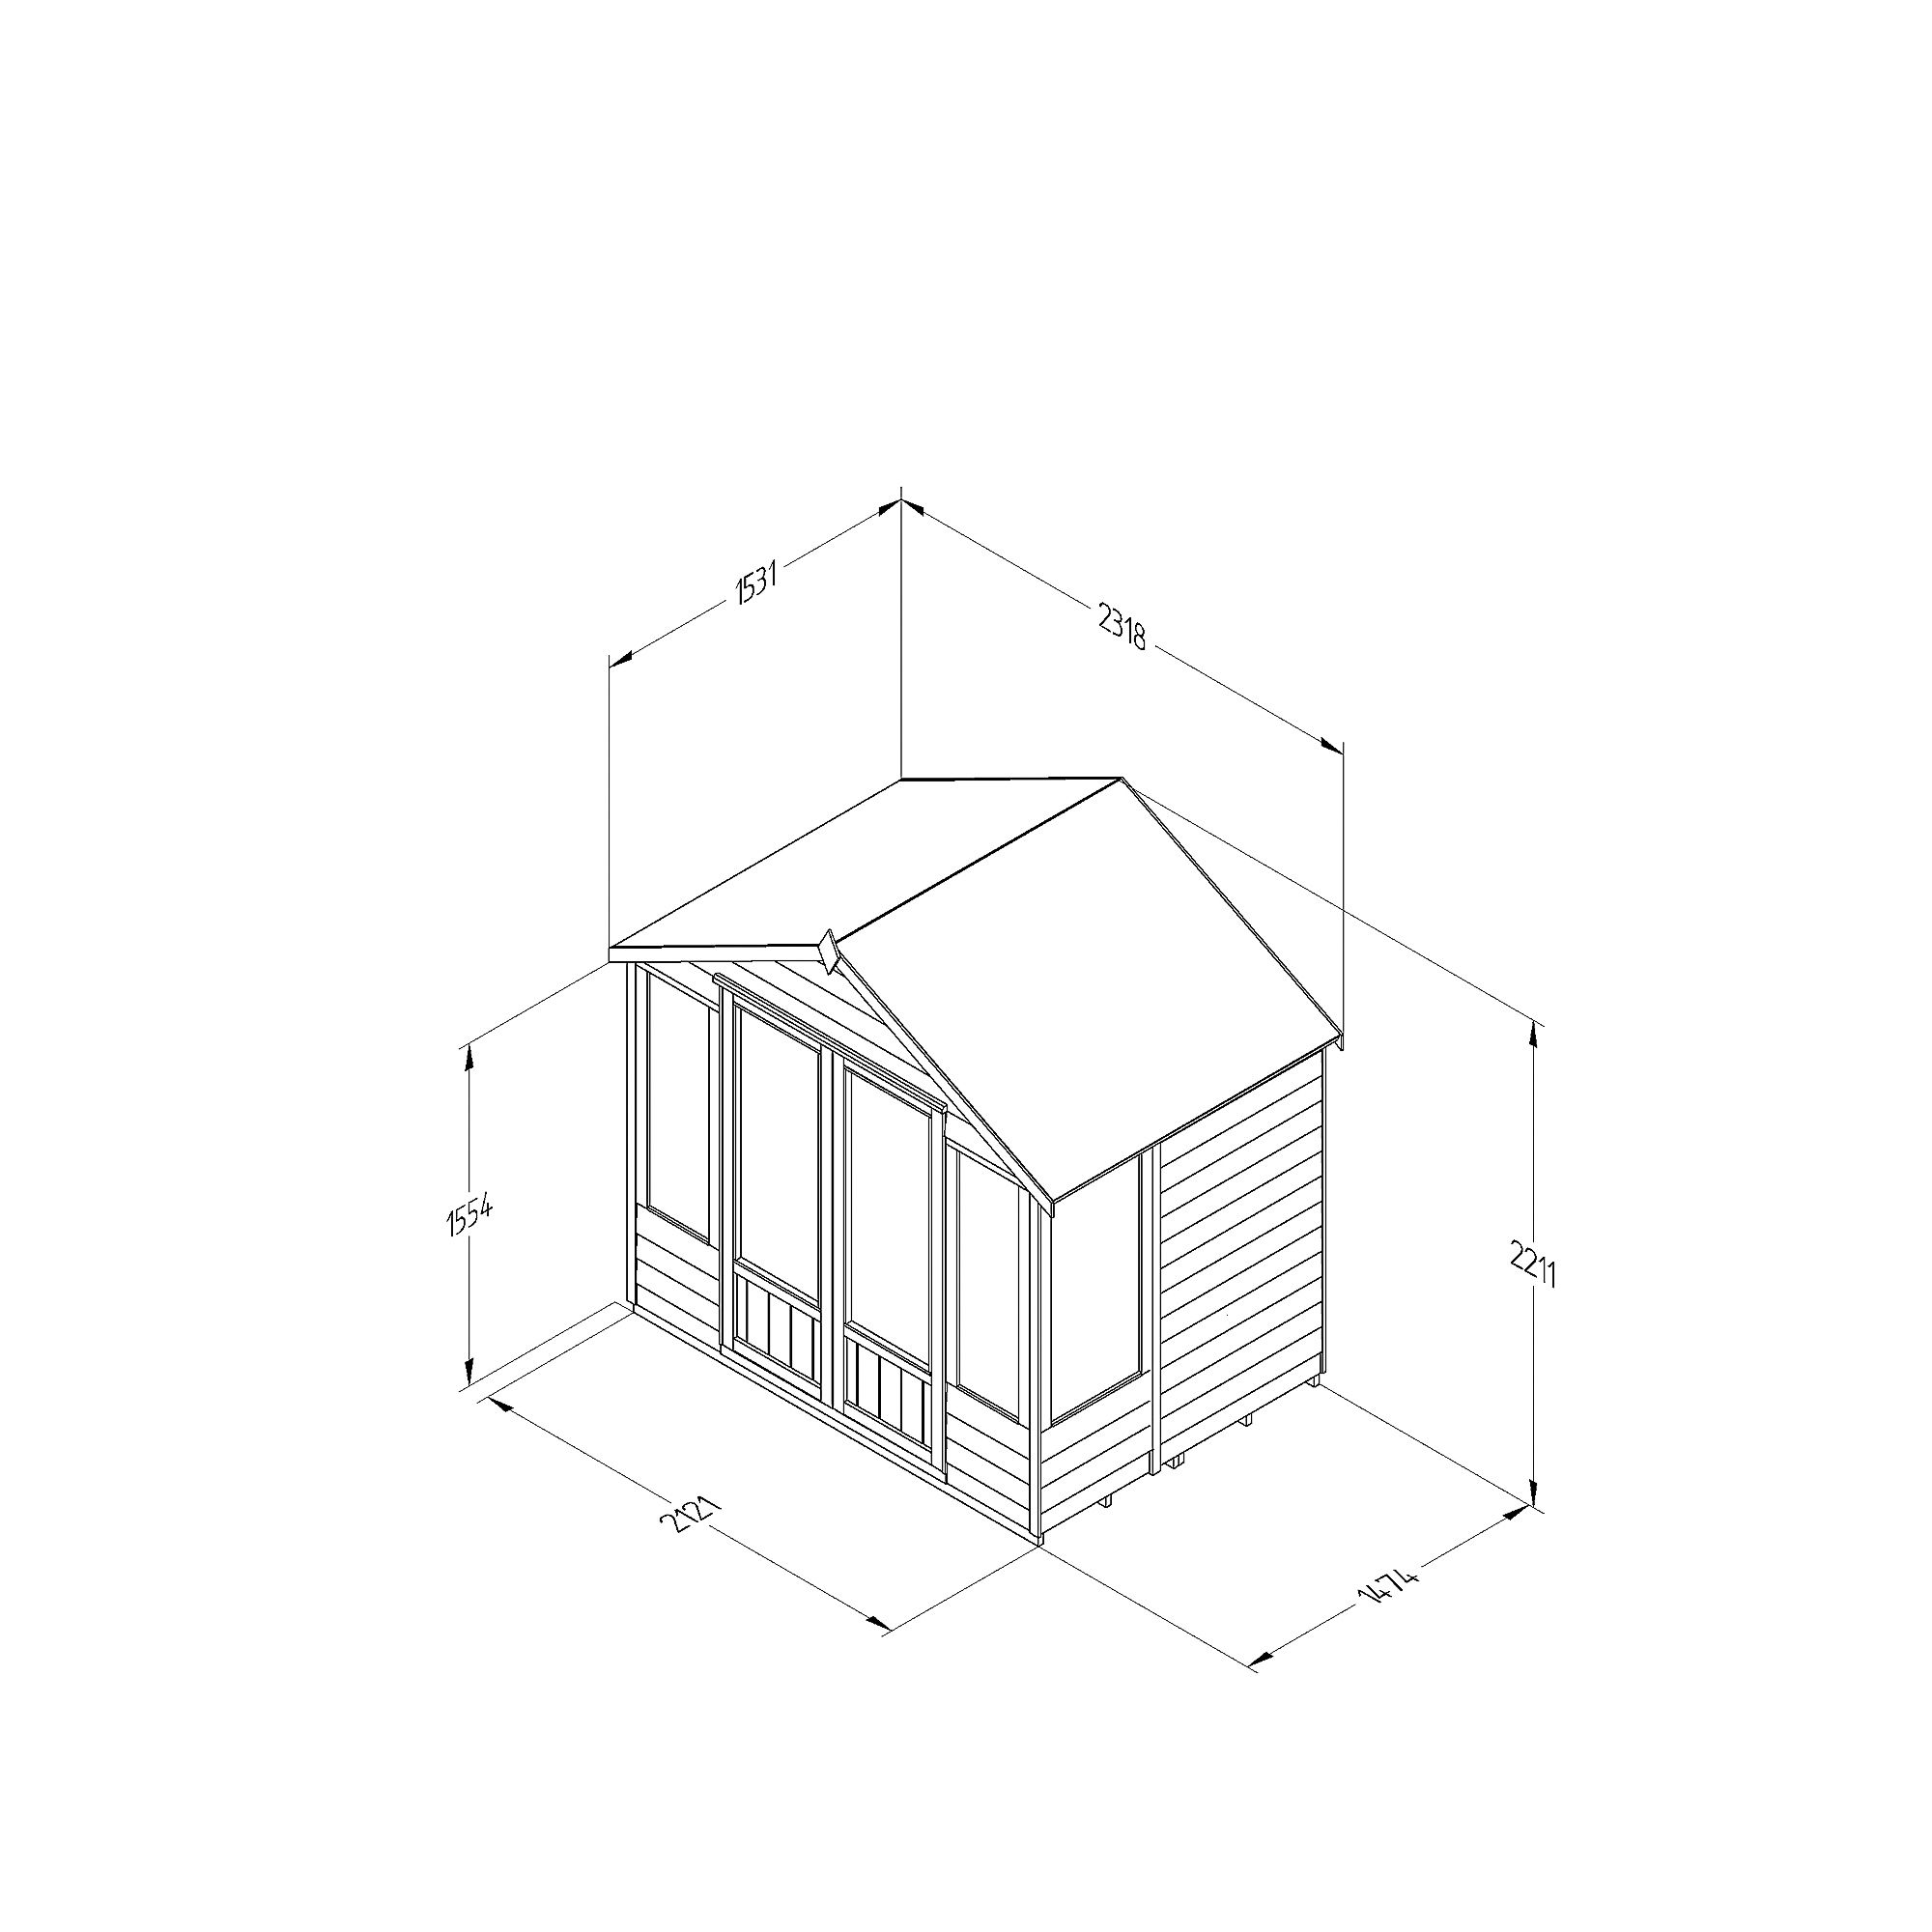 Forest Garden Oakley 7x5 ft with Double door & 4 windows Apex Wooden Summer house - Assembly service included